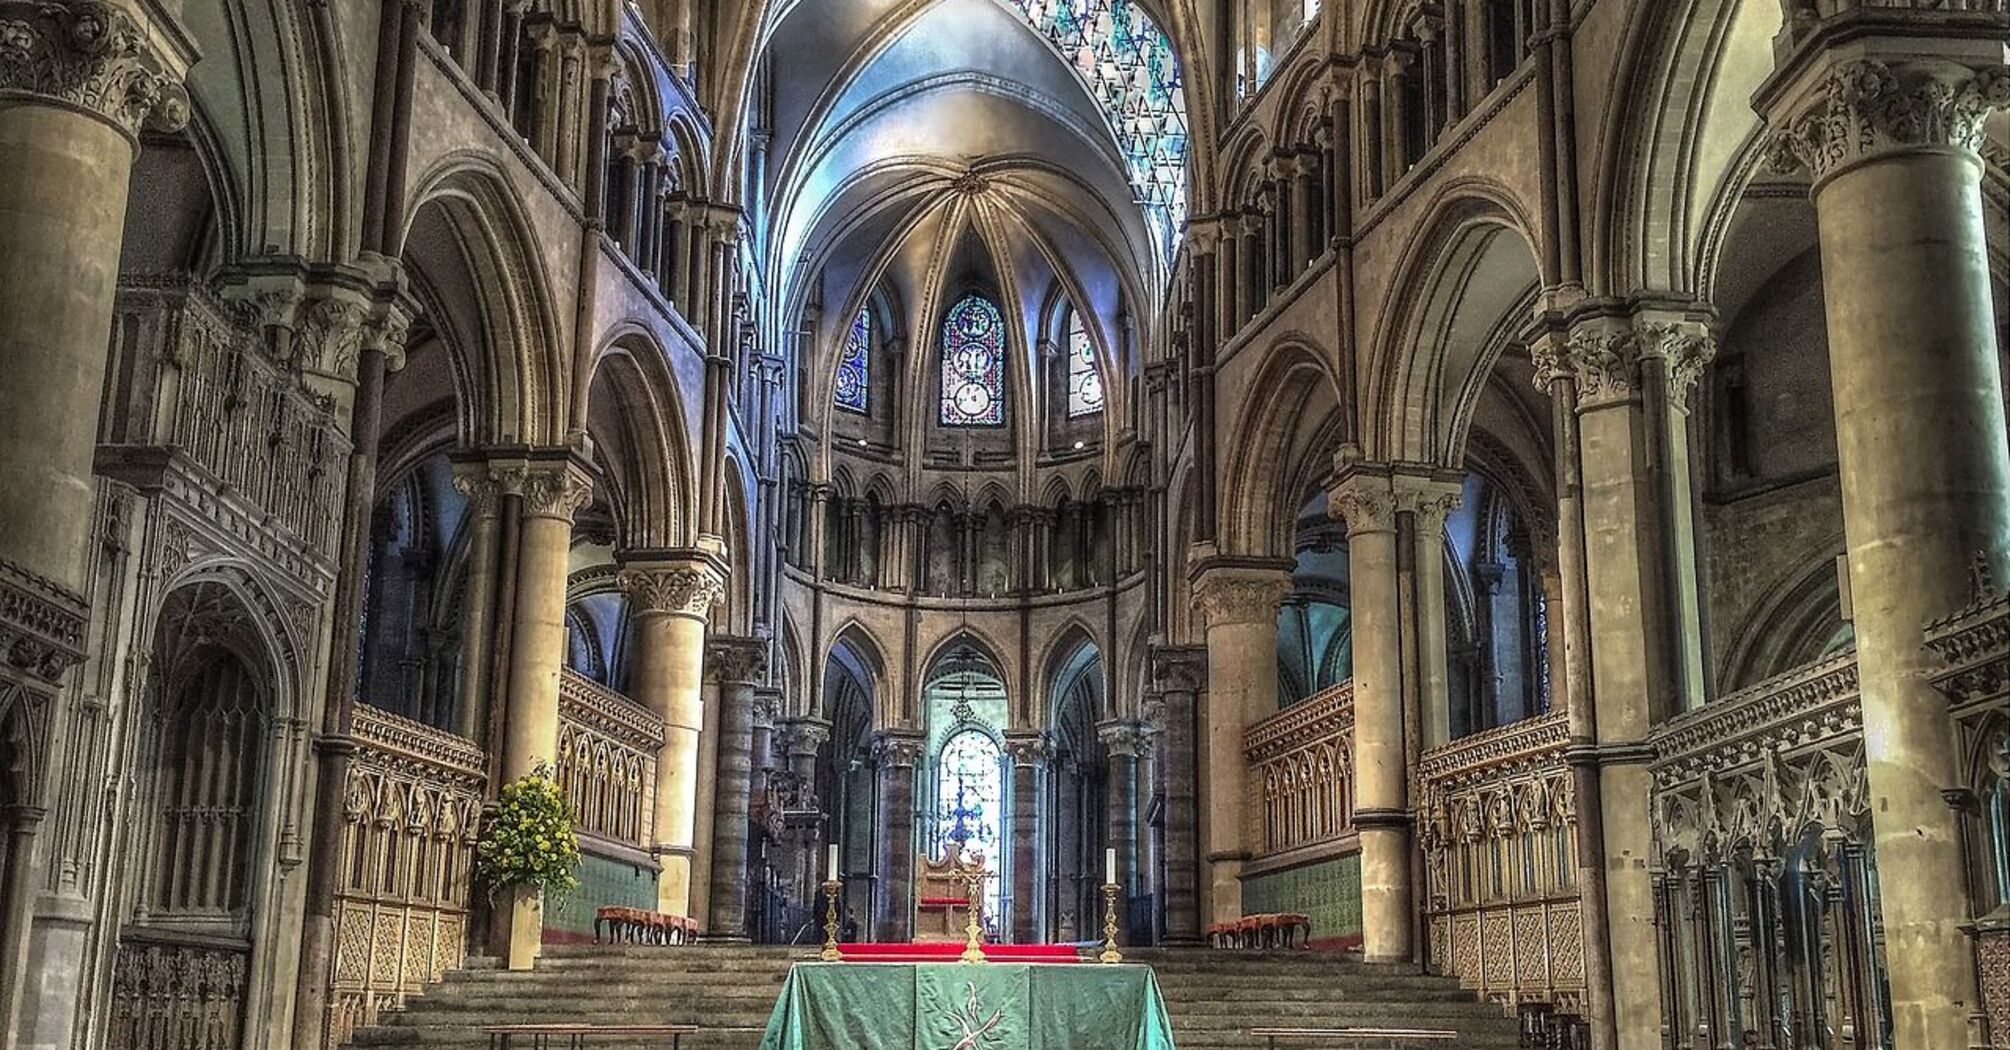 'Silent' party in Canterbury Cathedral causes outrage among Christians